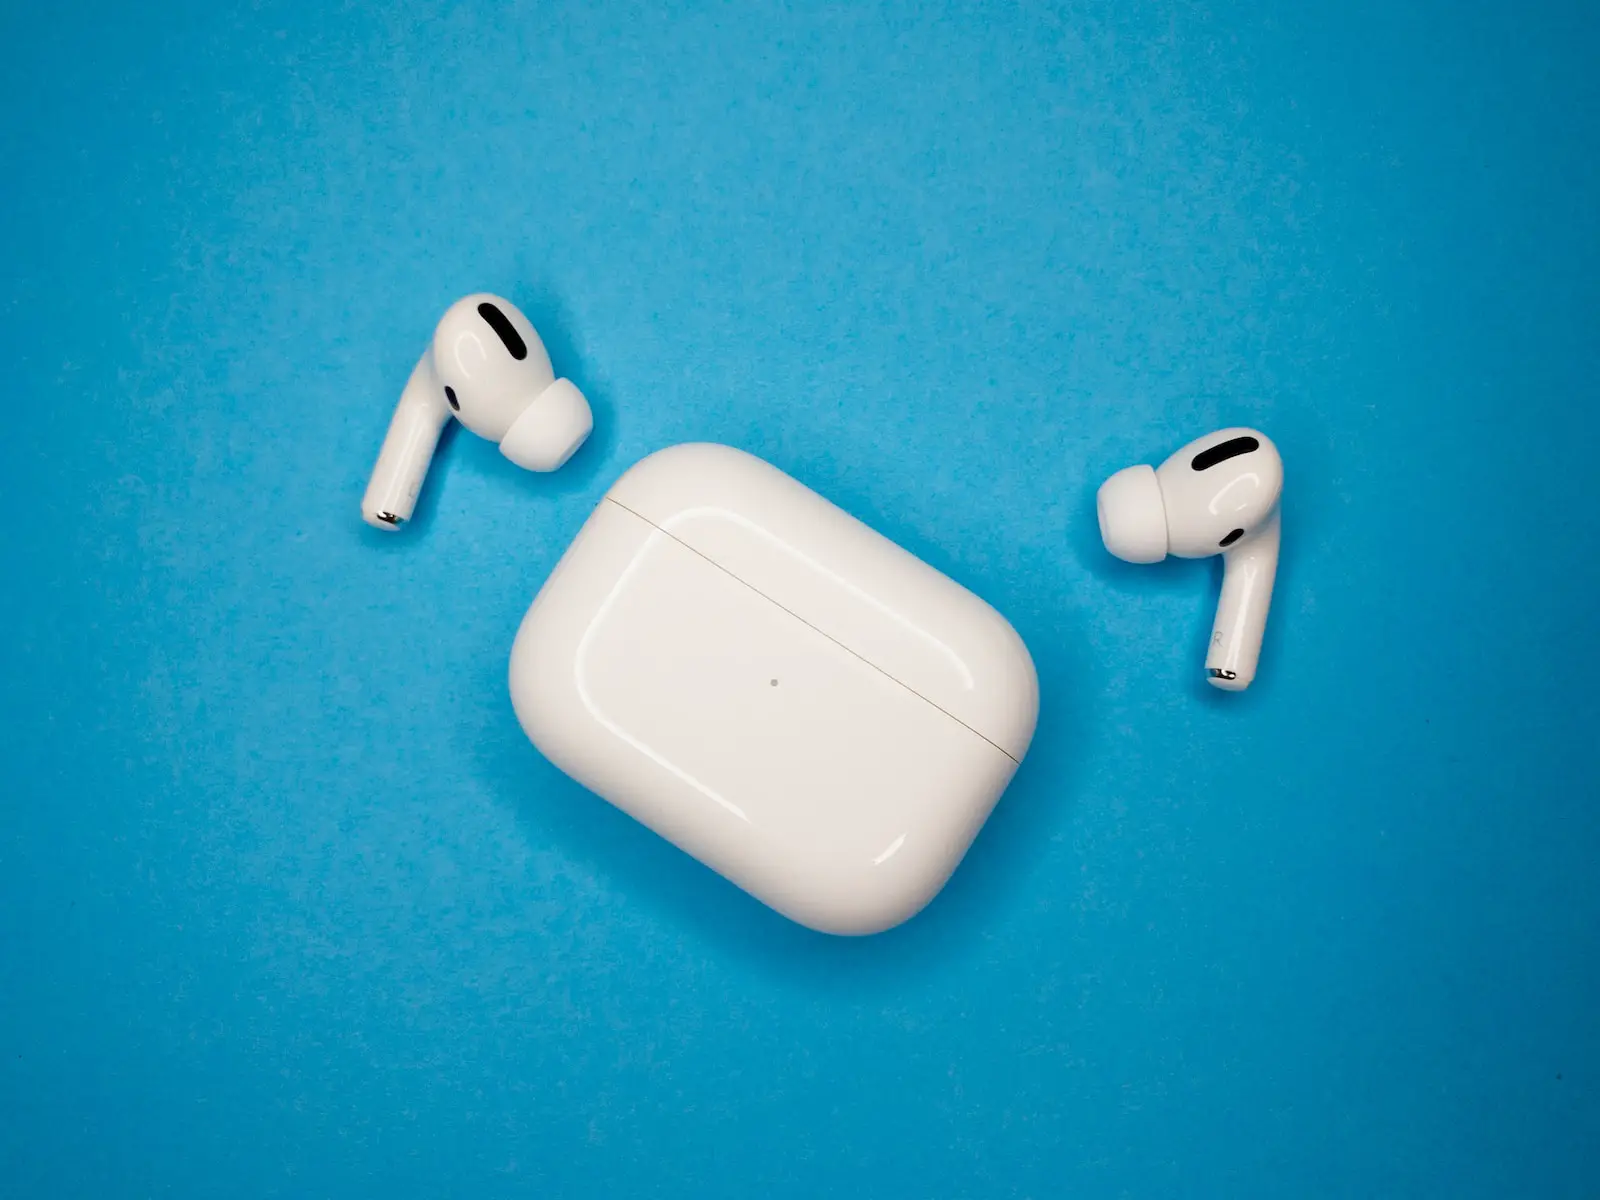 can airpods be stolen and used?